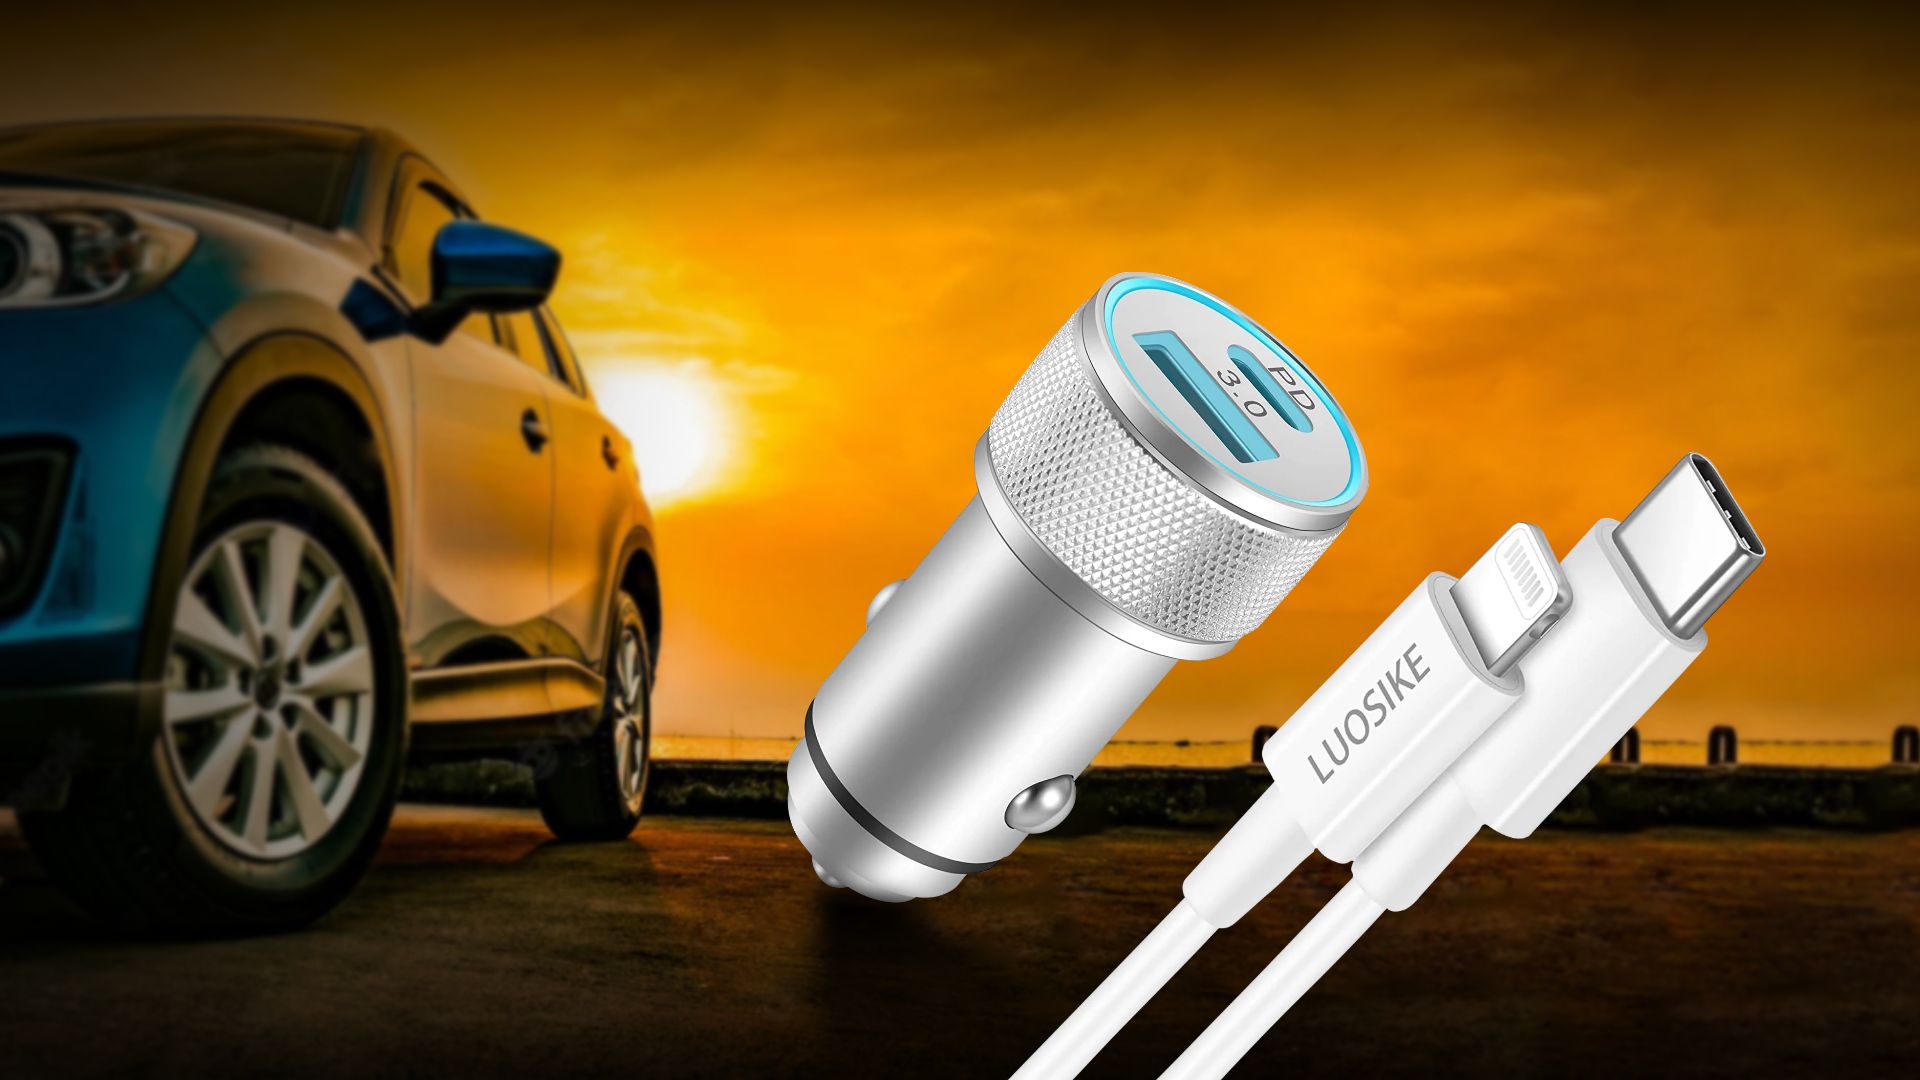 Luosike 20W USB C Fast Car Charger for iPhone